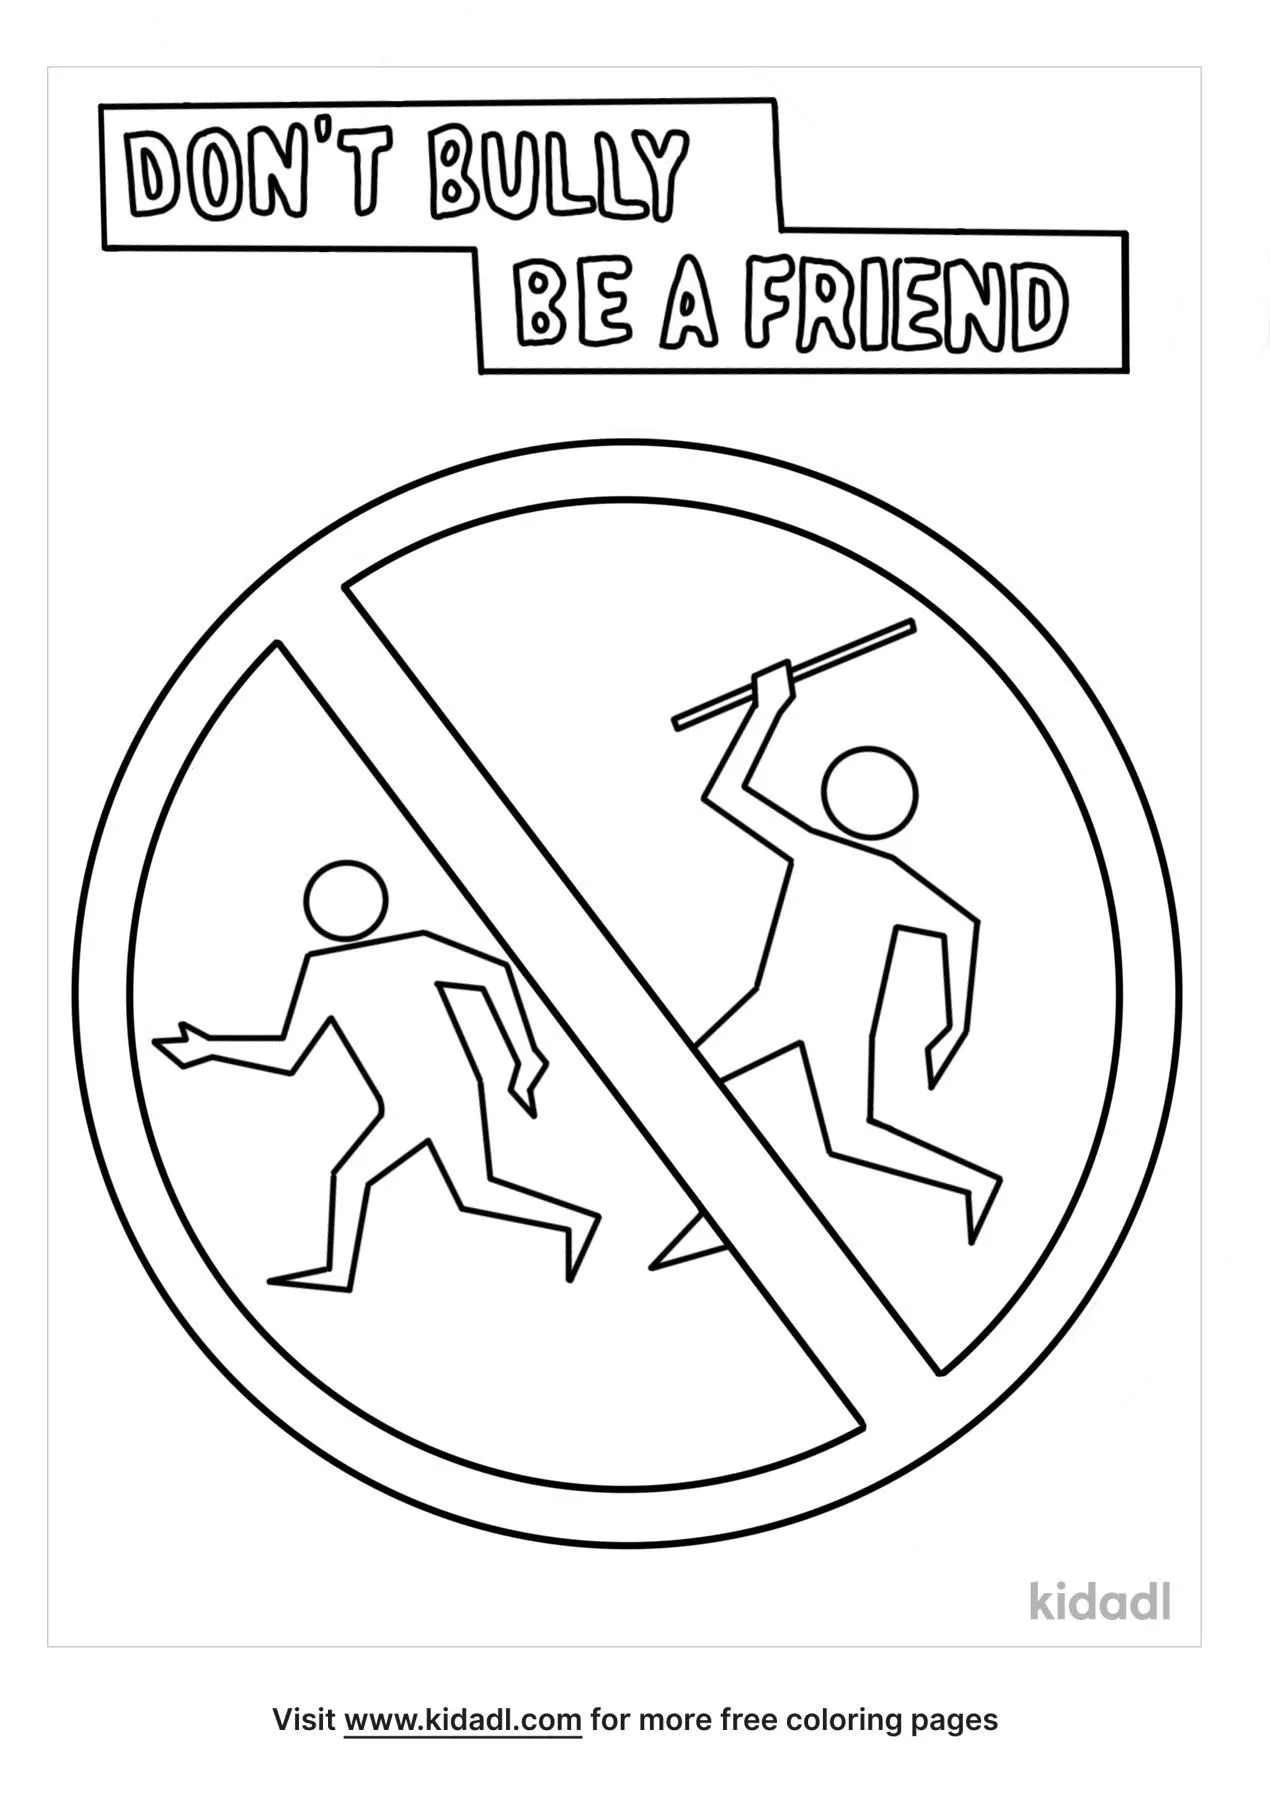 Anti Bullying Coloring Page | Free Signs Coloring Page | Kidadl